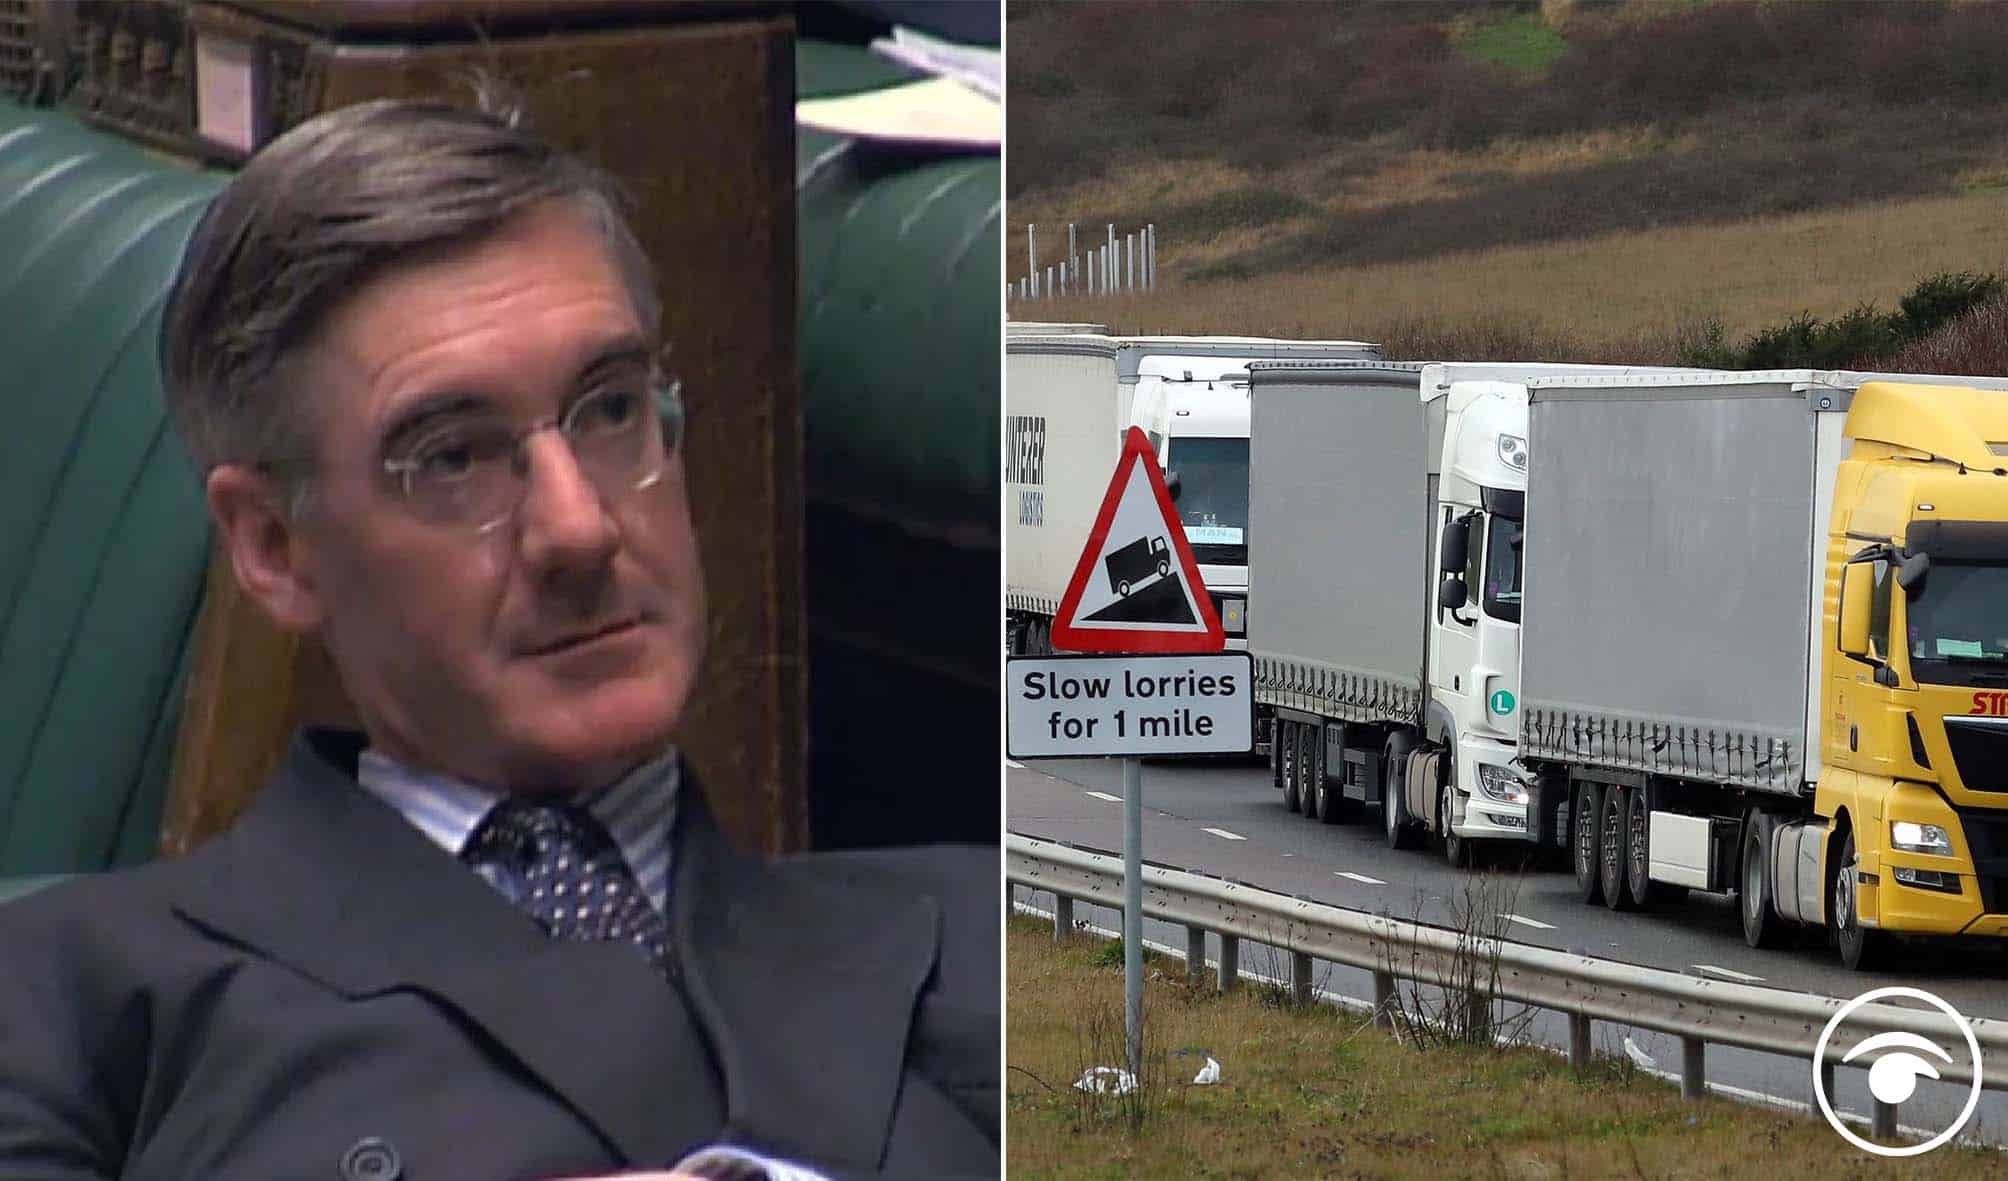 This thread rips apart Rees-Mogg’s claims of a post-Brexit bonanza for Britain